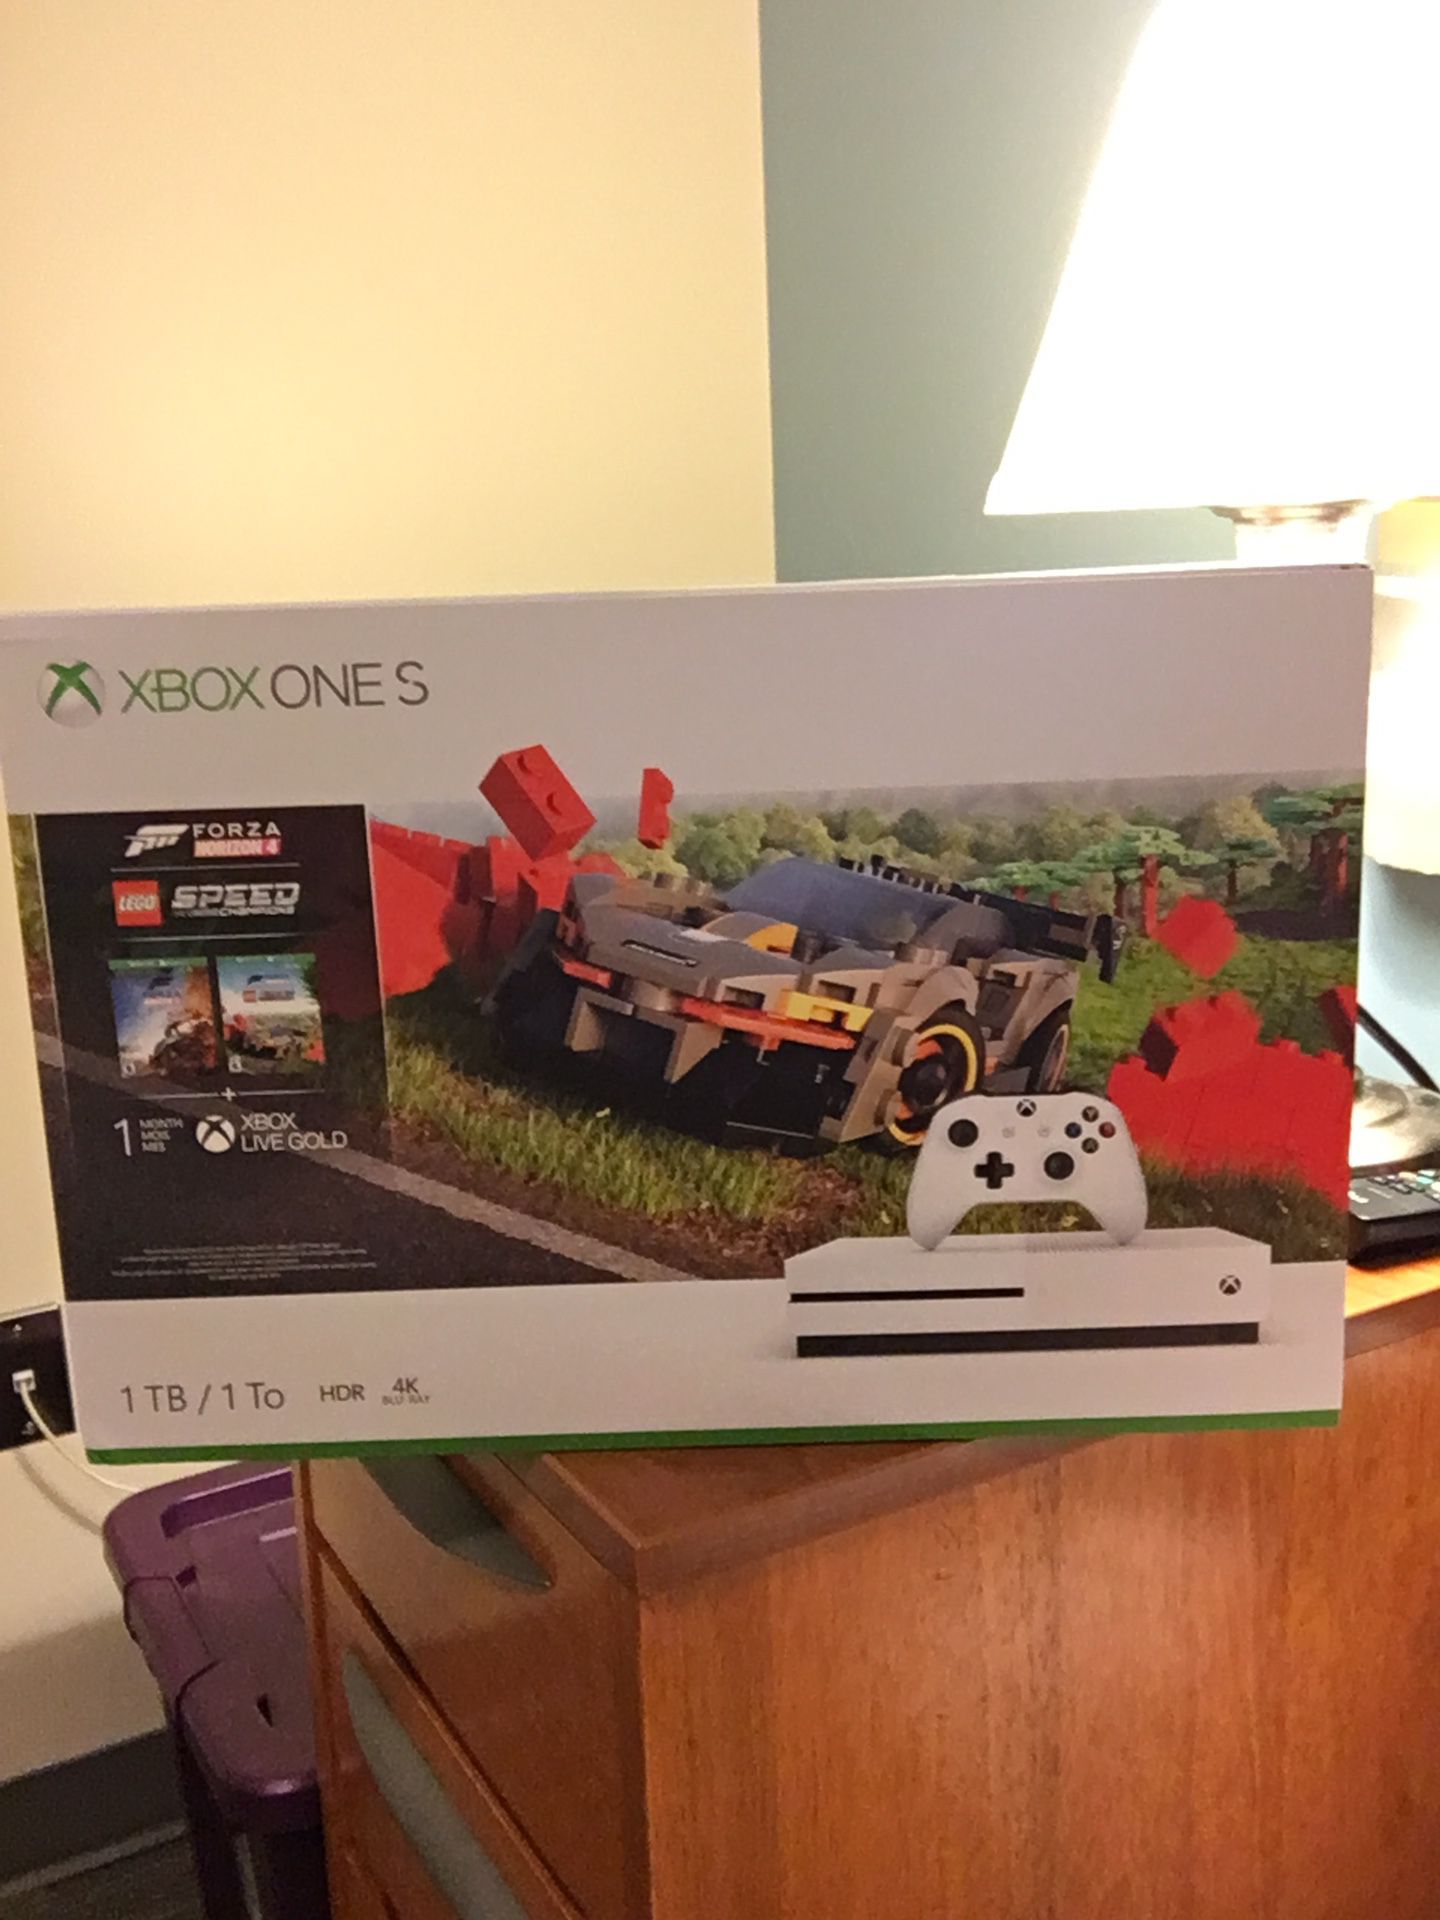 Xbox One S BRAND NEW 1 TB/HDR/4K Make an Offer